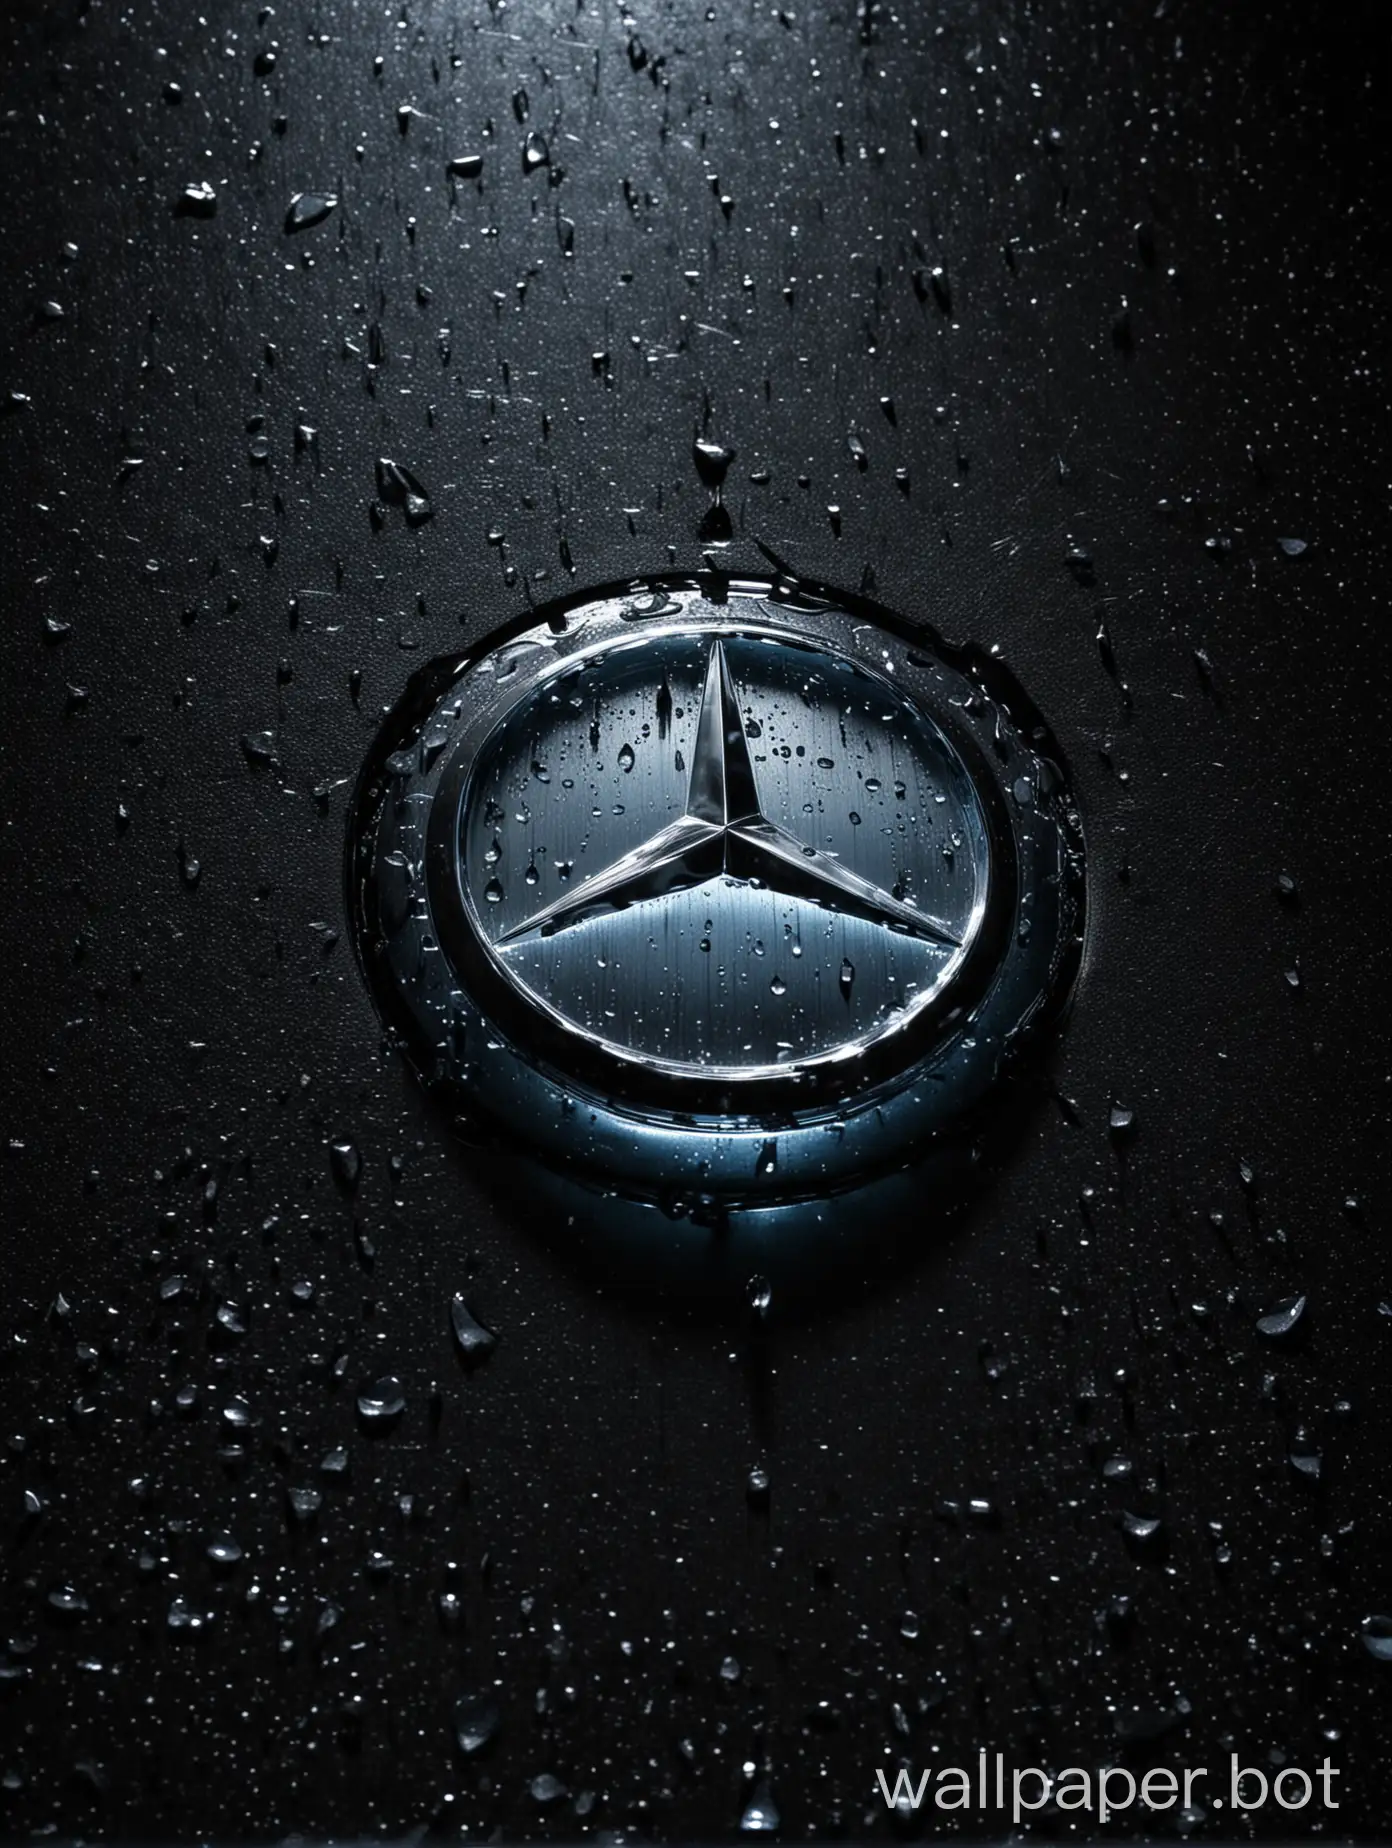 Illuminated-Mercedes-Logo-at-Night-with-Water-Droplets